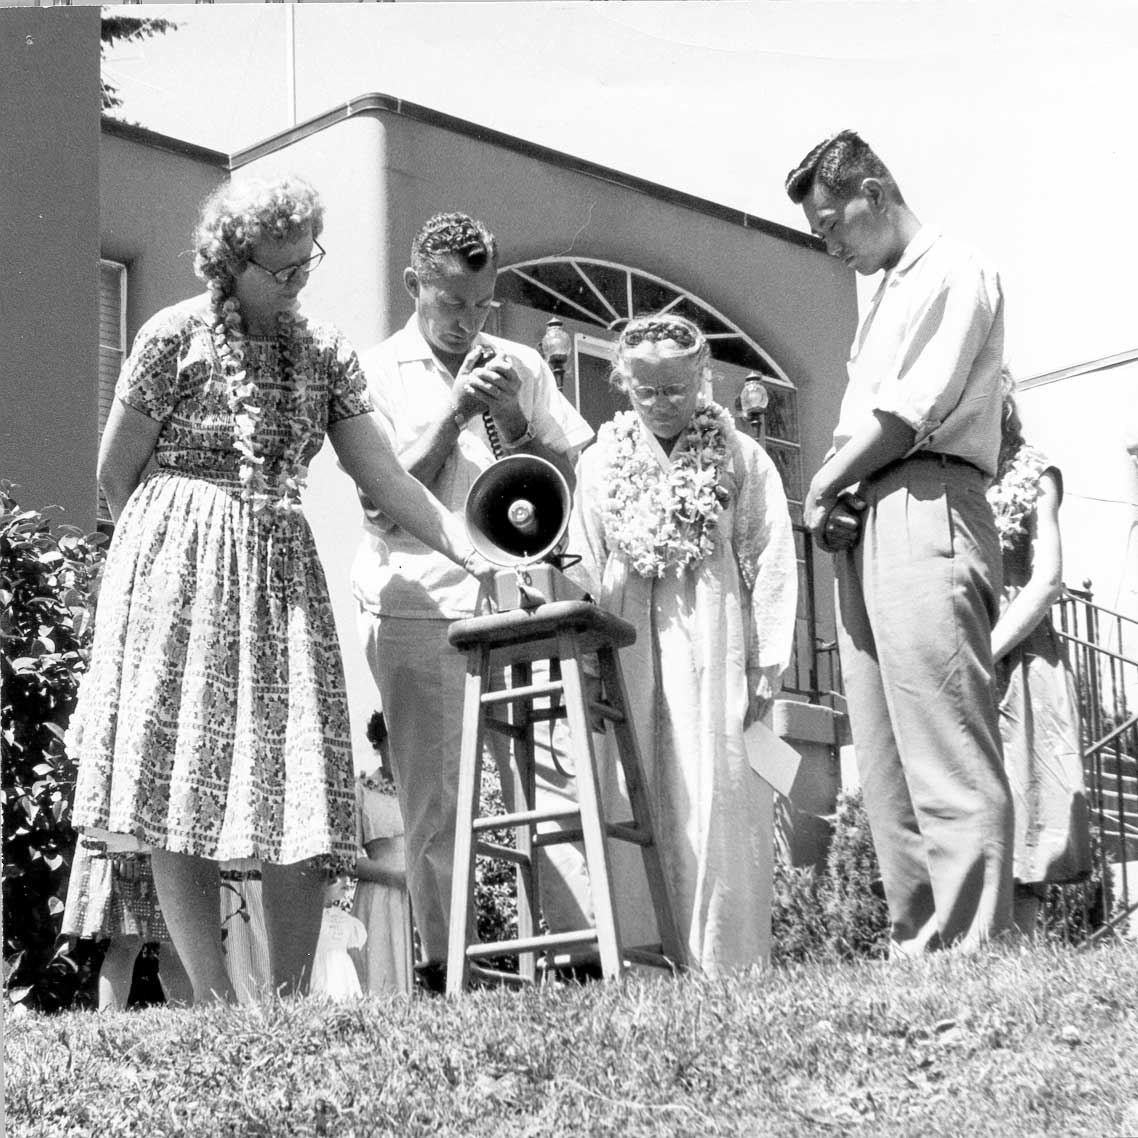 Holt staff at the first Holt picnic in 1957